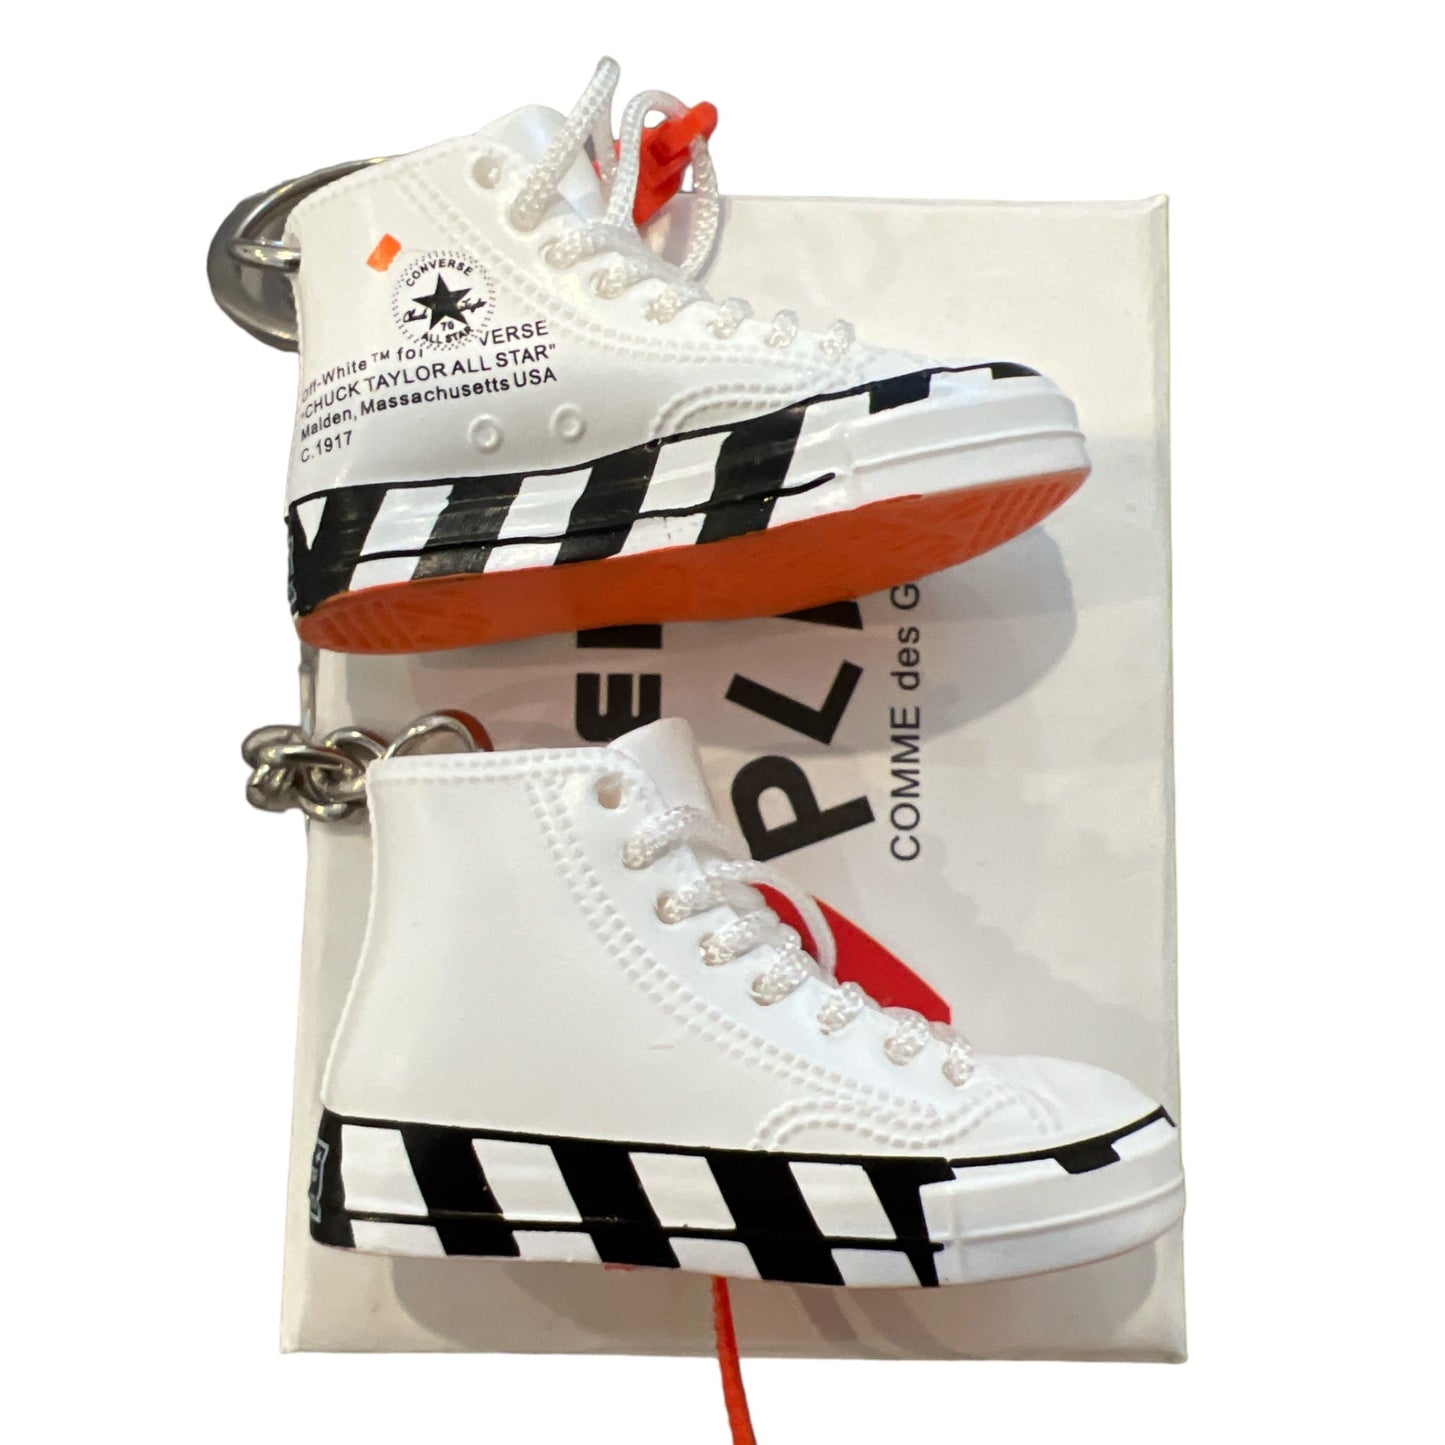 Off-White for Converse "Chuck Taylor All Star" - Something about Sofia